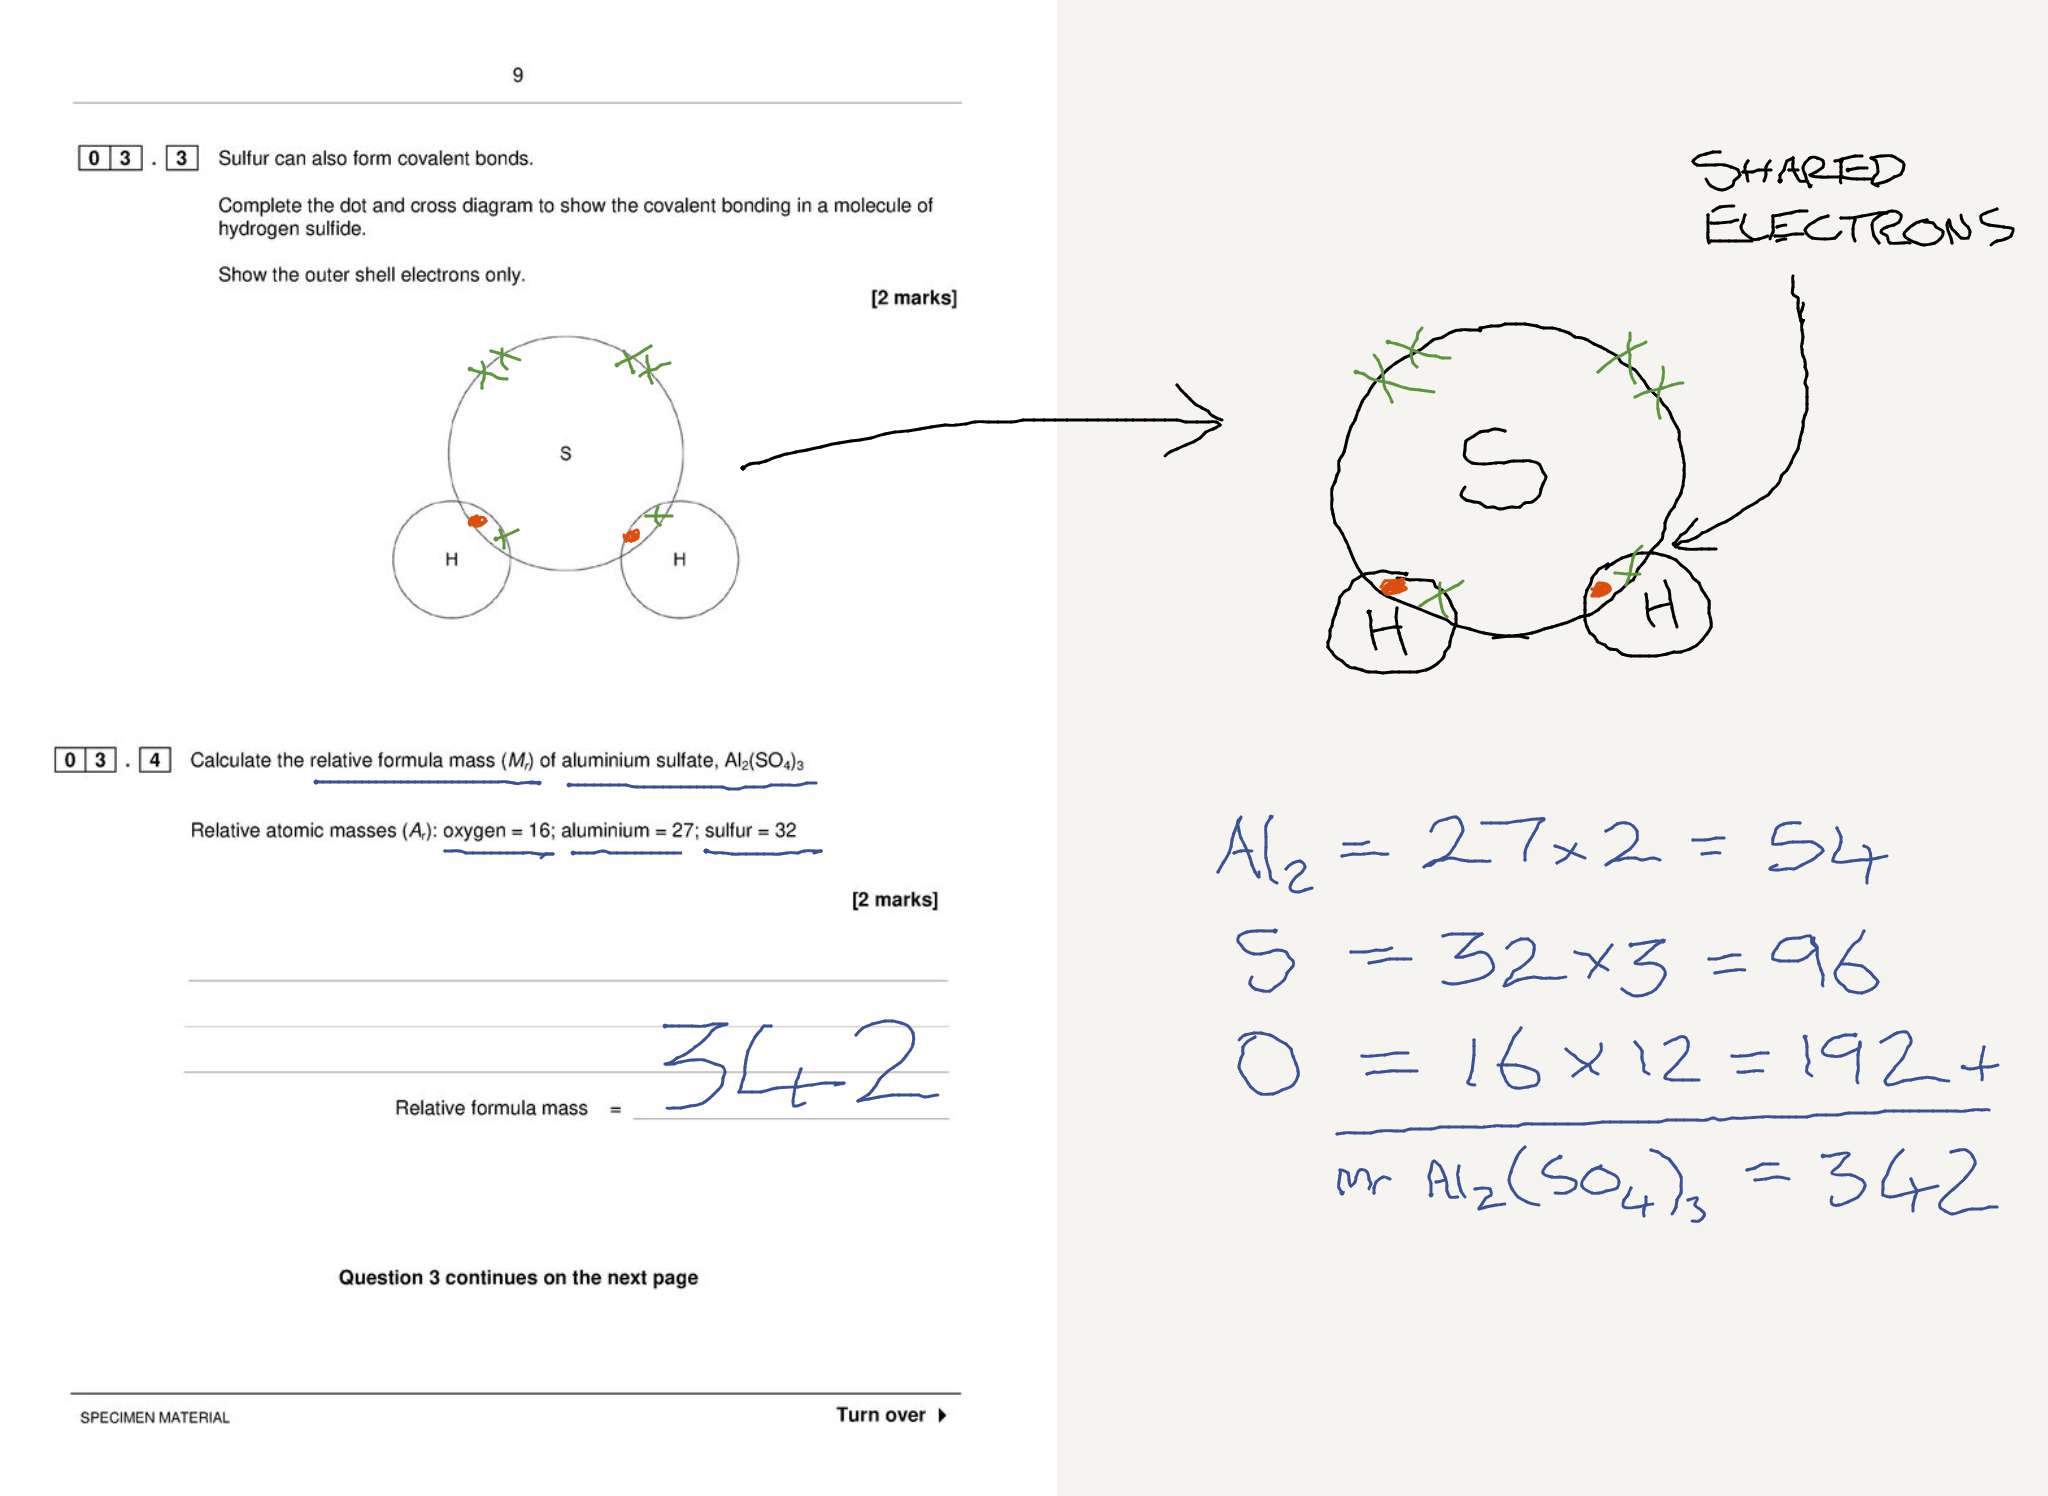 picture of a written exam answer drawn in Bramble using a wacom drawing tablet and pen